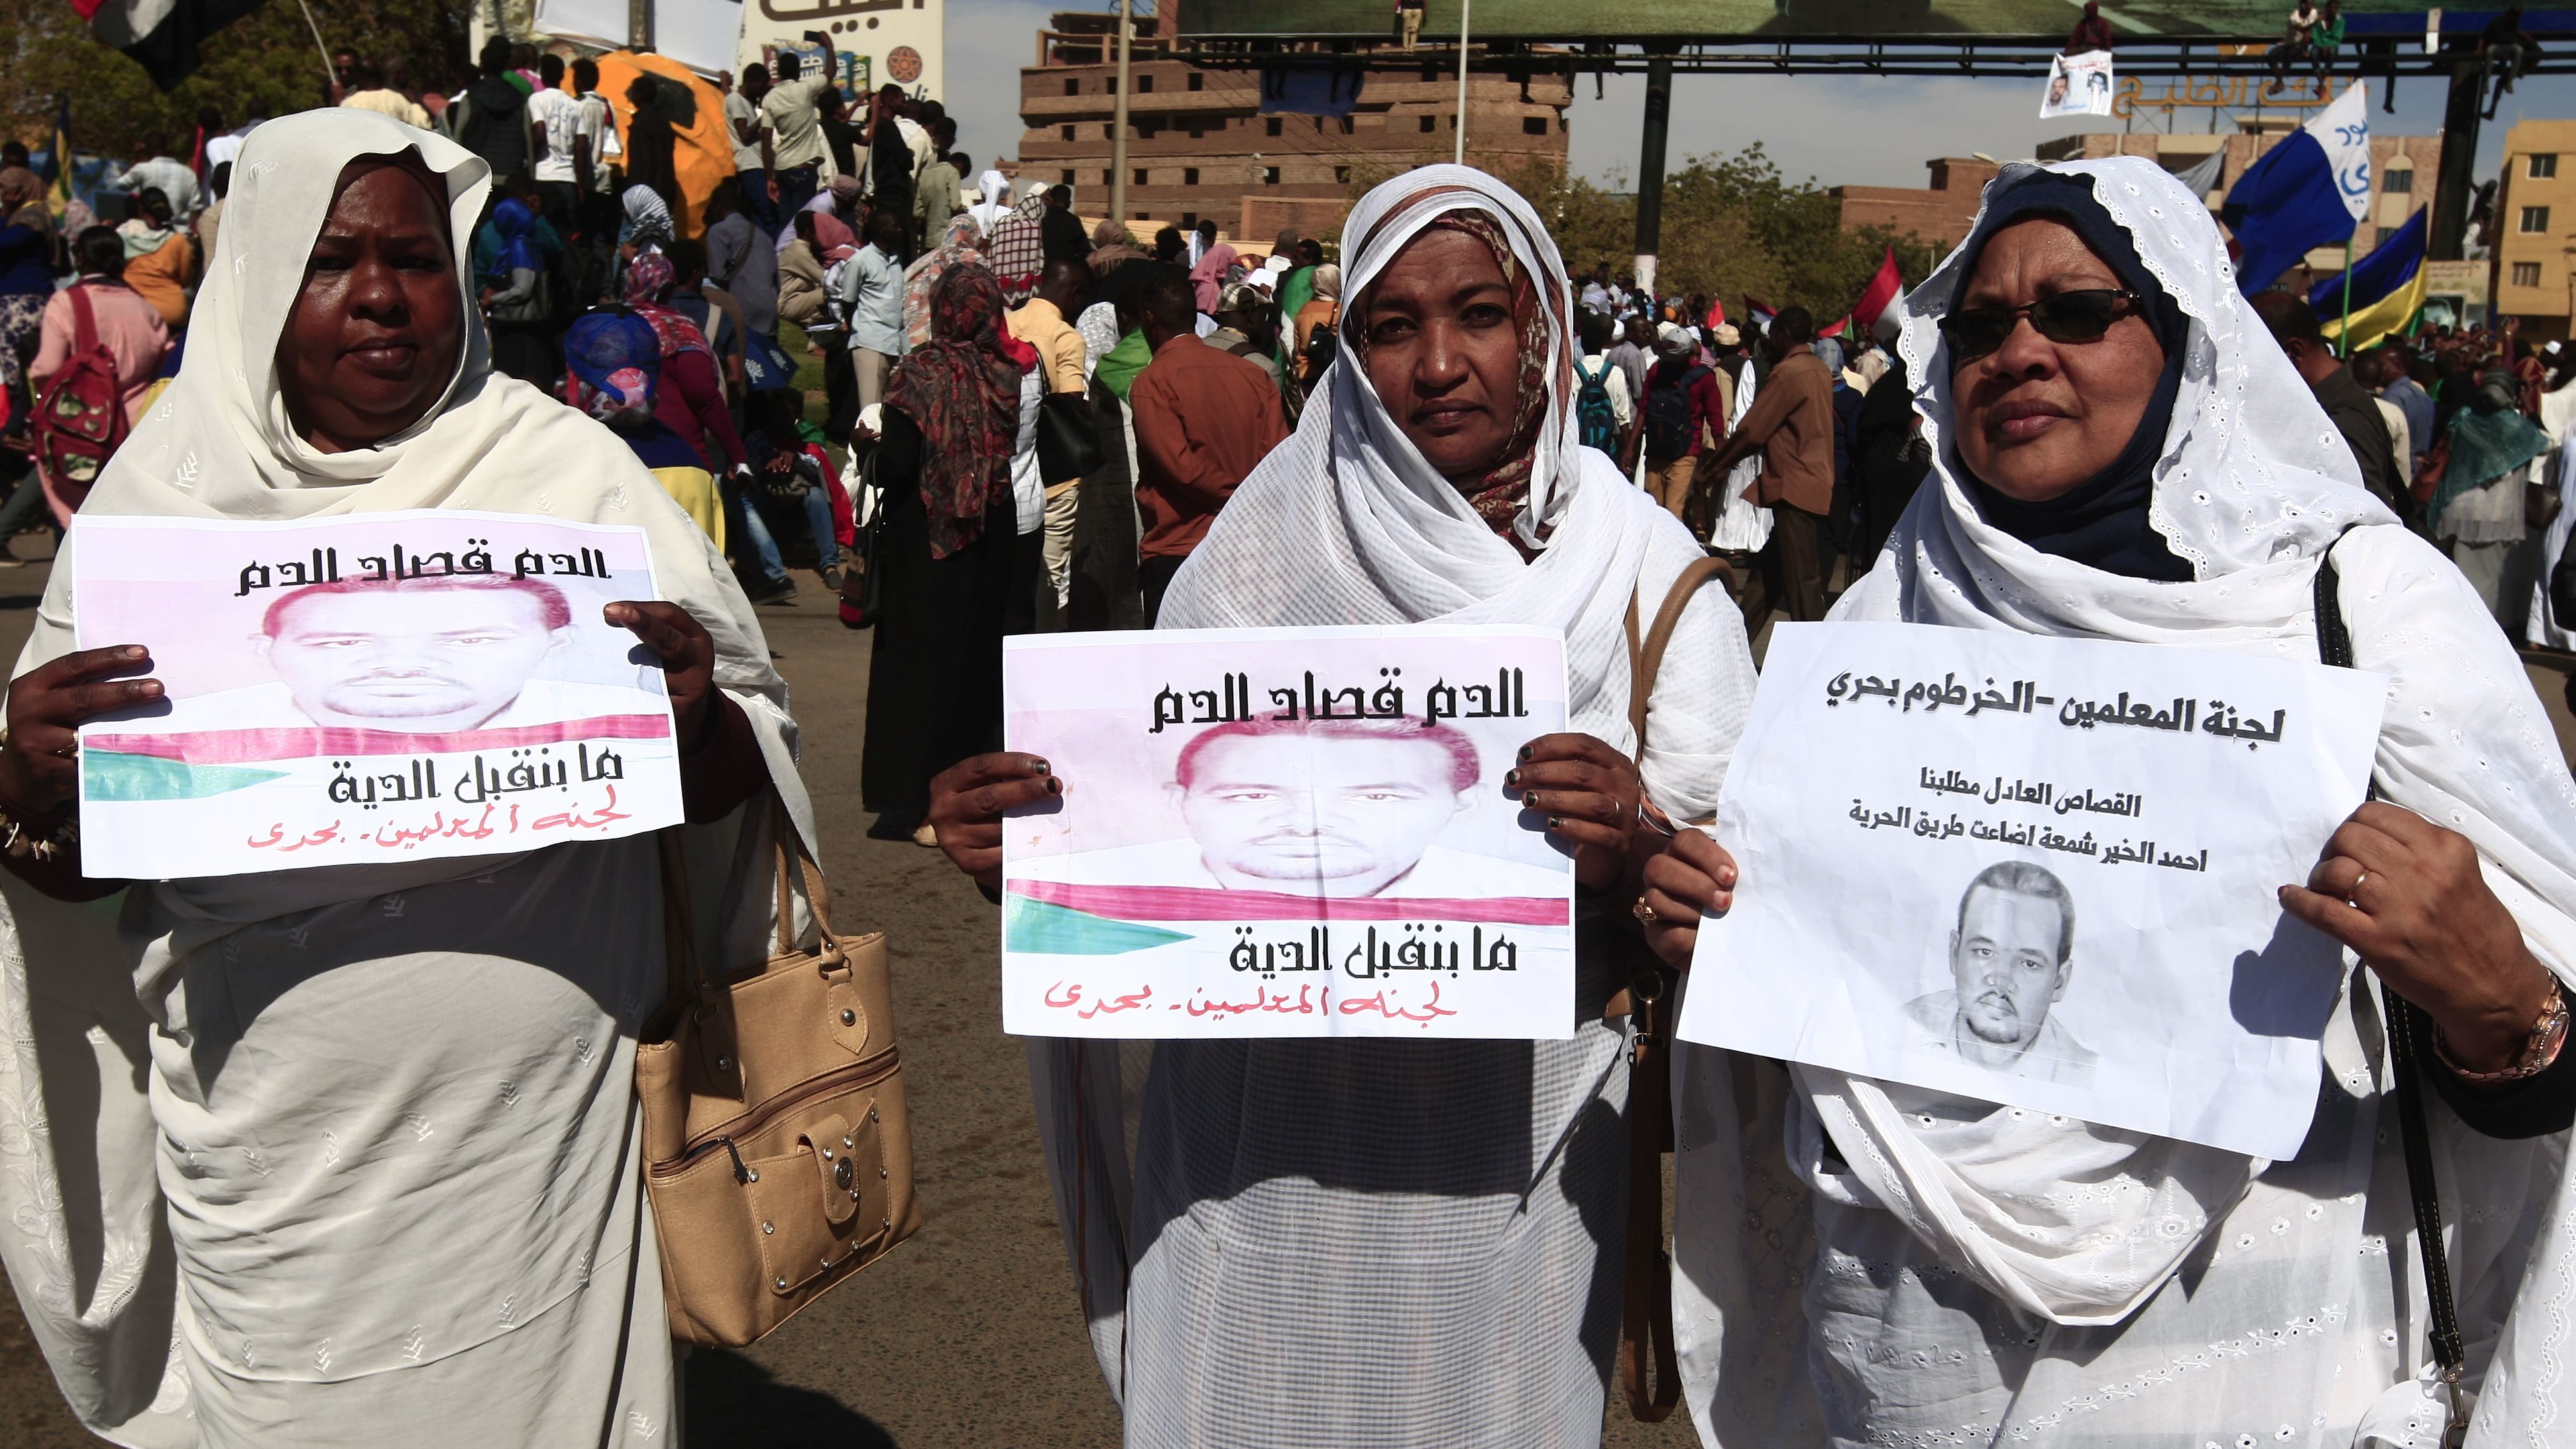 27 Sentenced to Death for Killing Detained Protester in Sudan